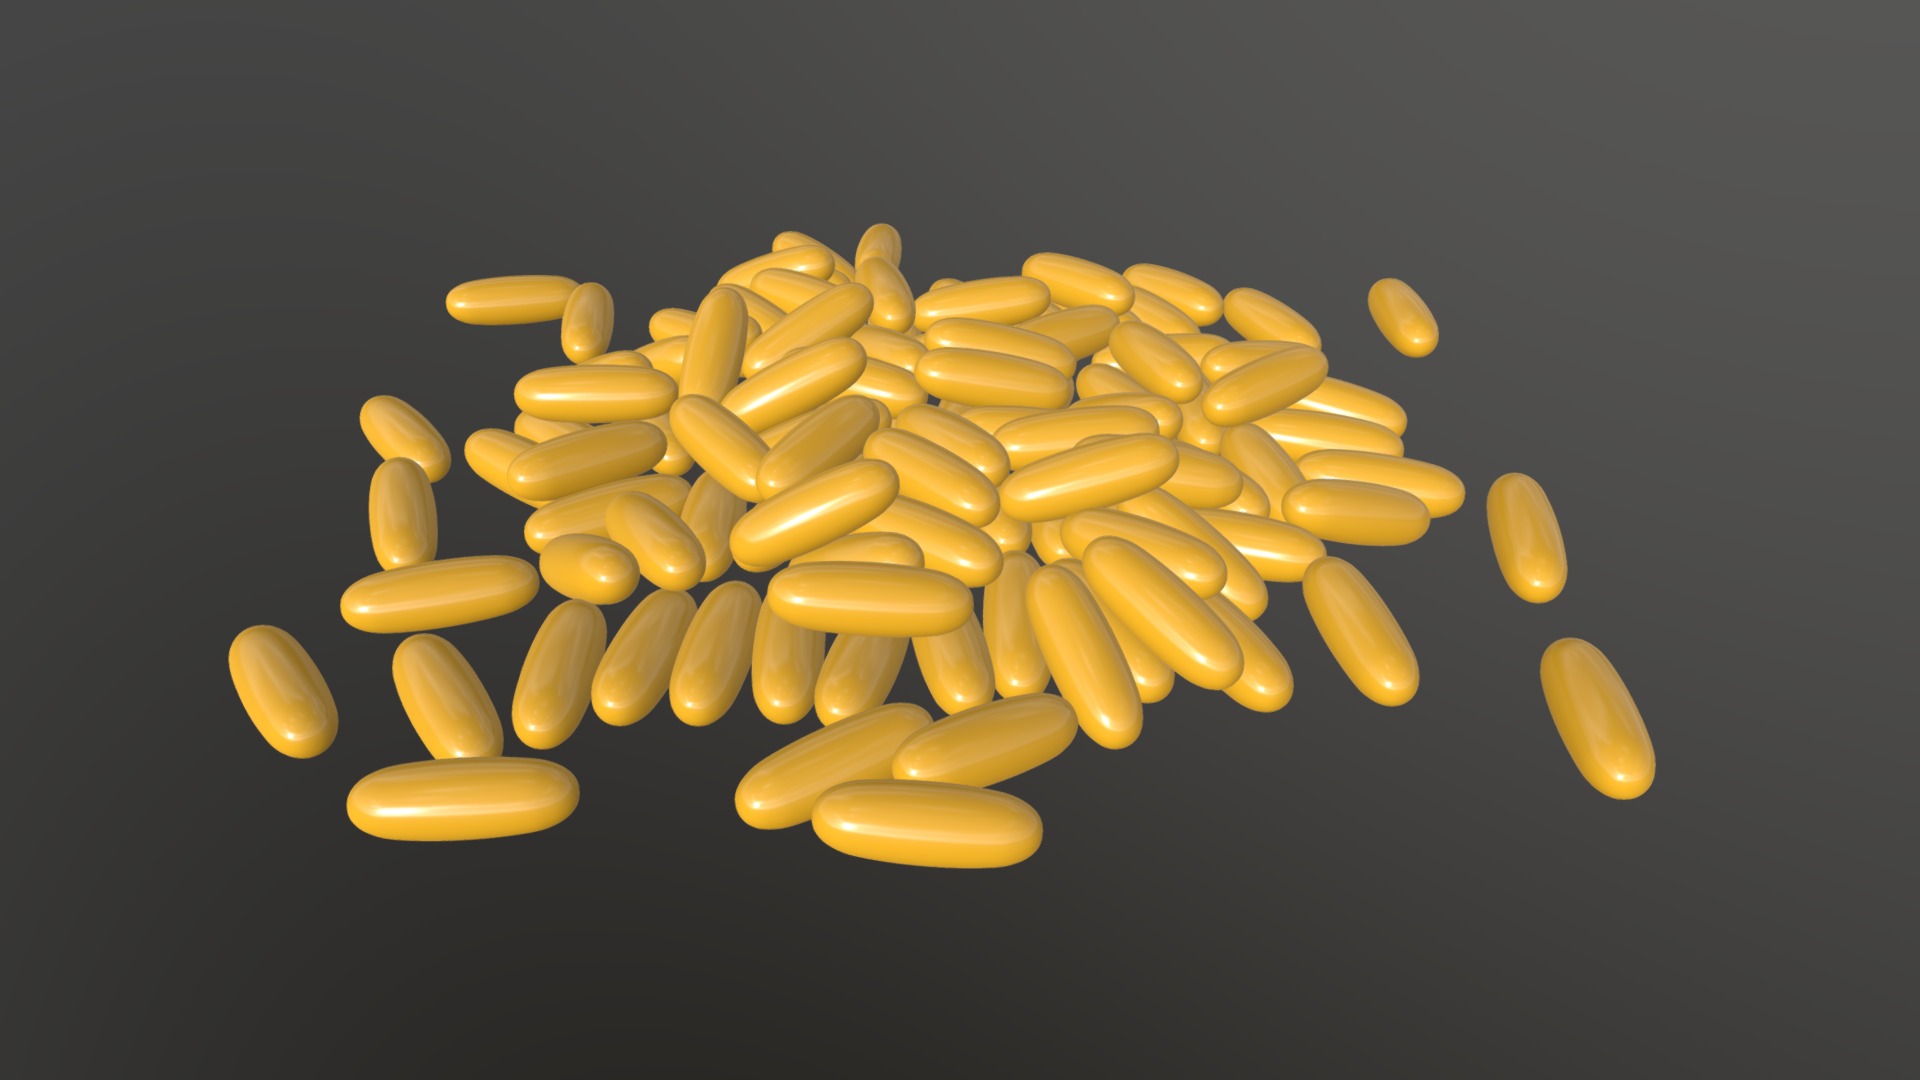 3D model pills 05 - This is a 3D model of the pills 05. The 3D model is about a pile of yellow pills.